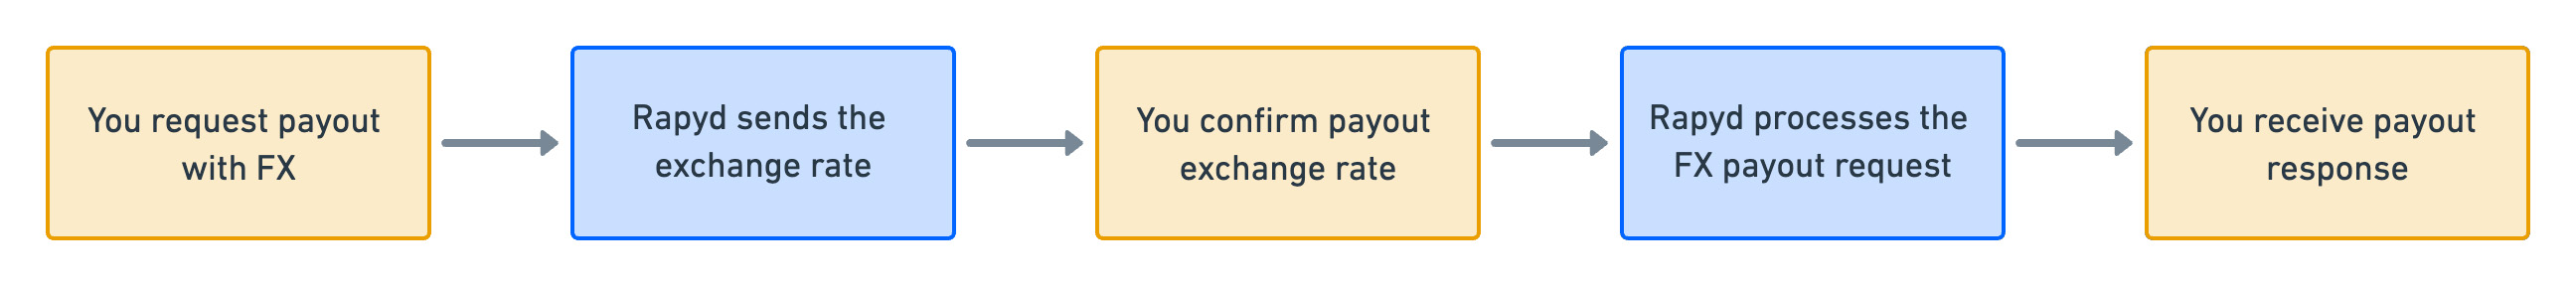 payout-with-fx.jpg